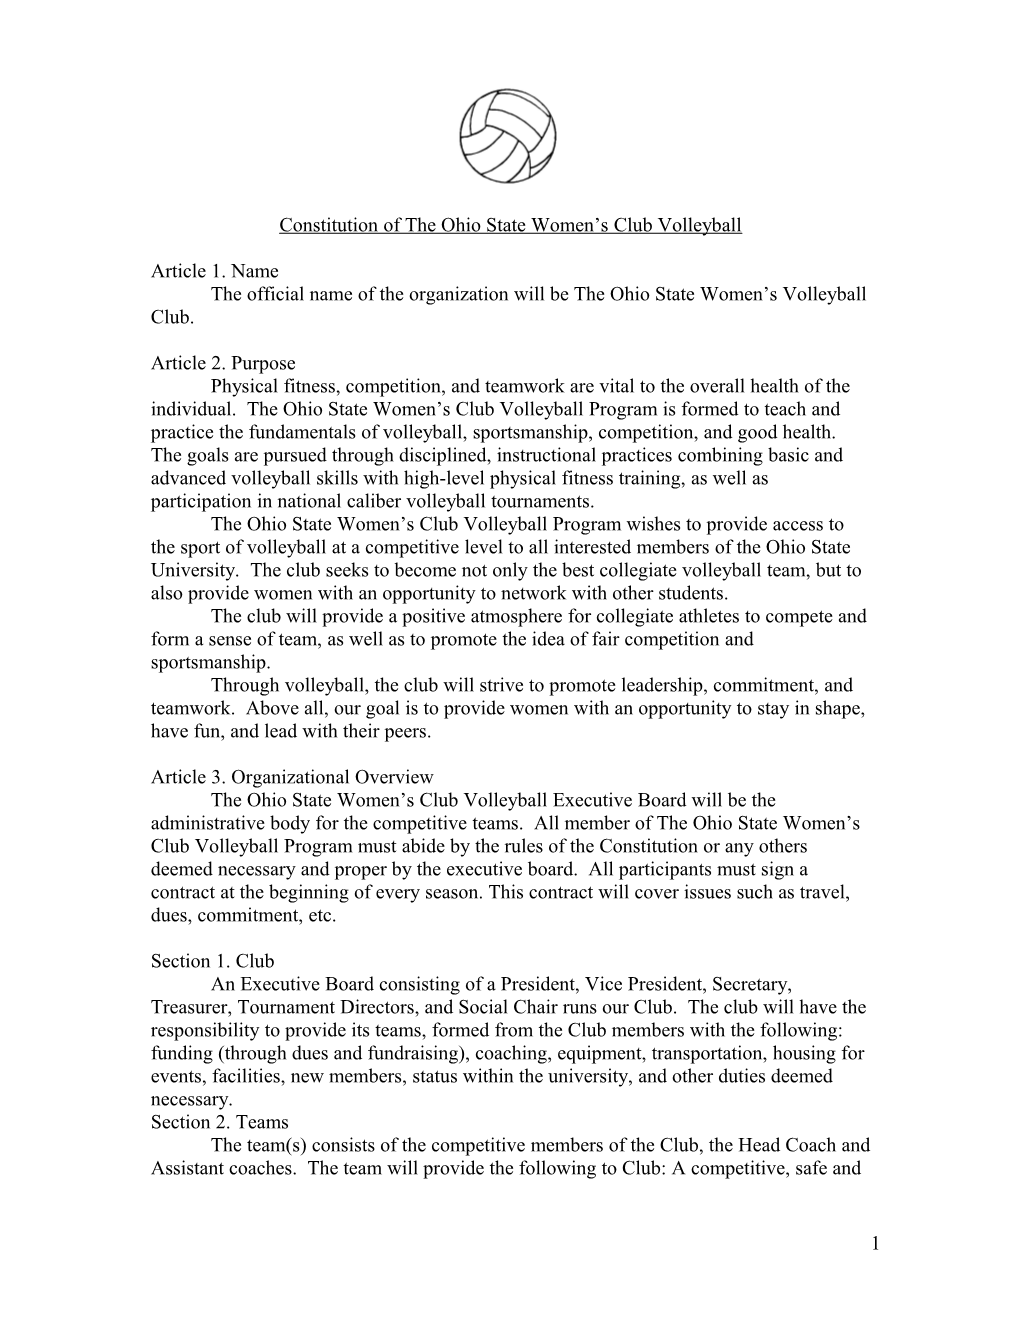 Constitution of the Ohio State Women S Club Volleyball